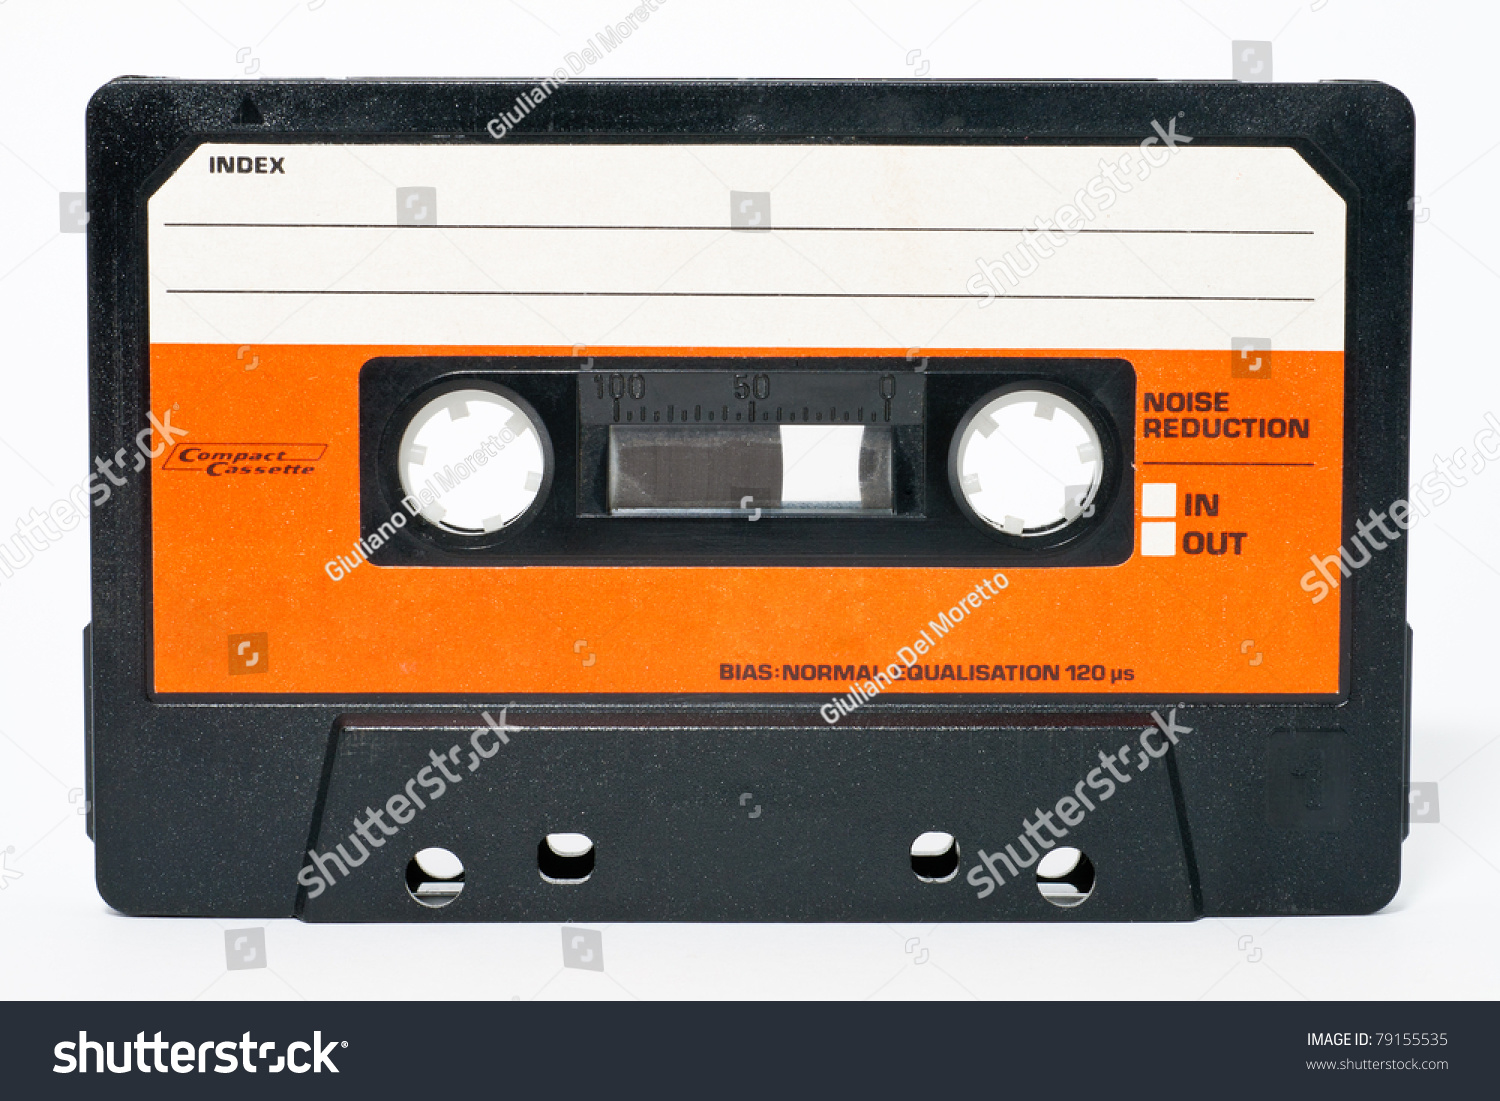 Cassette tape isolated on a white background #79155535